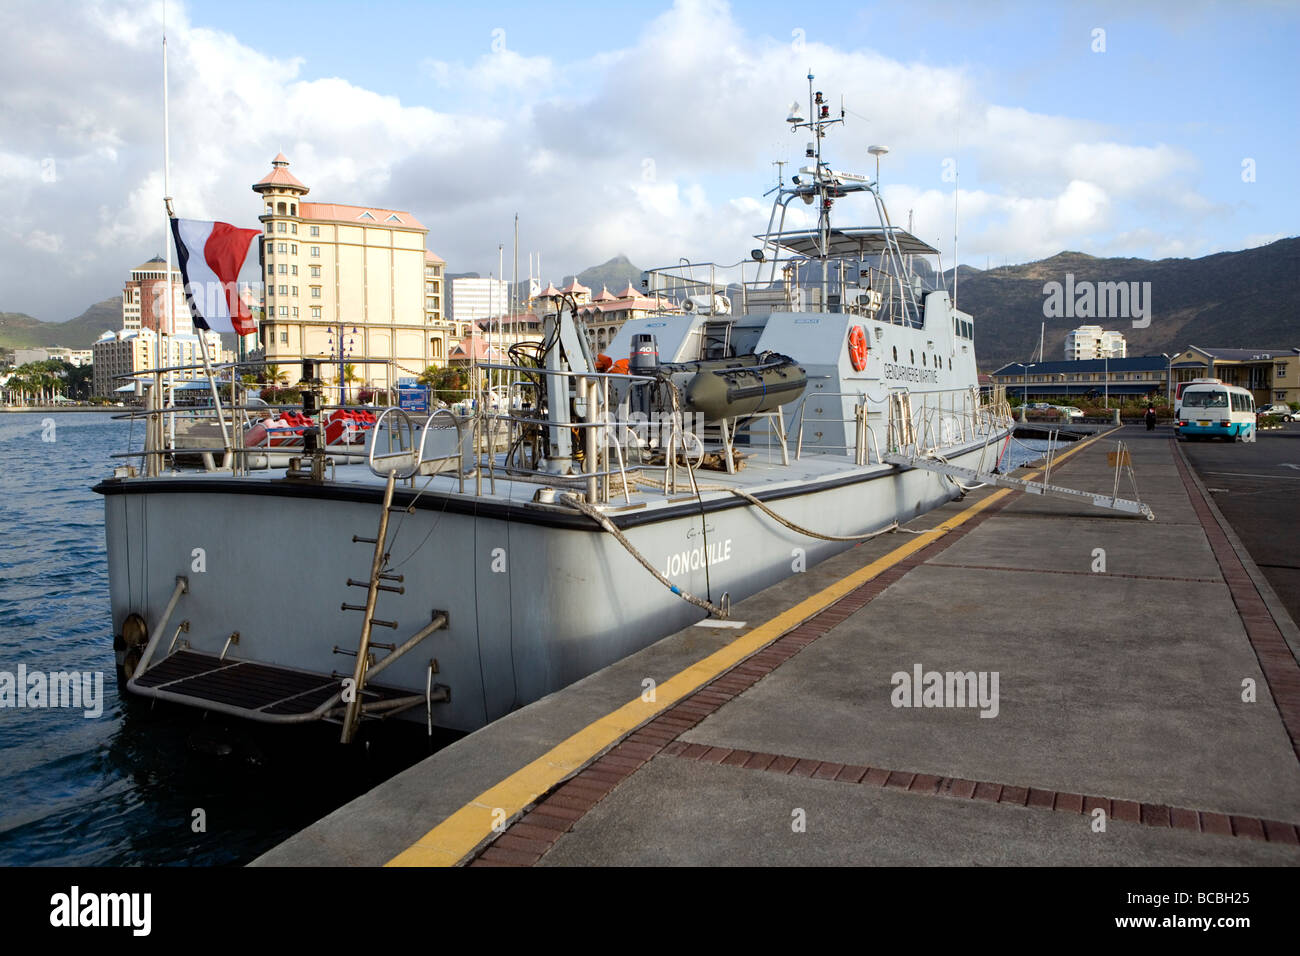 French Naval Patrol boat visitor, Caudan Harbour, Mauritius Stock Photo